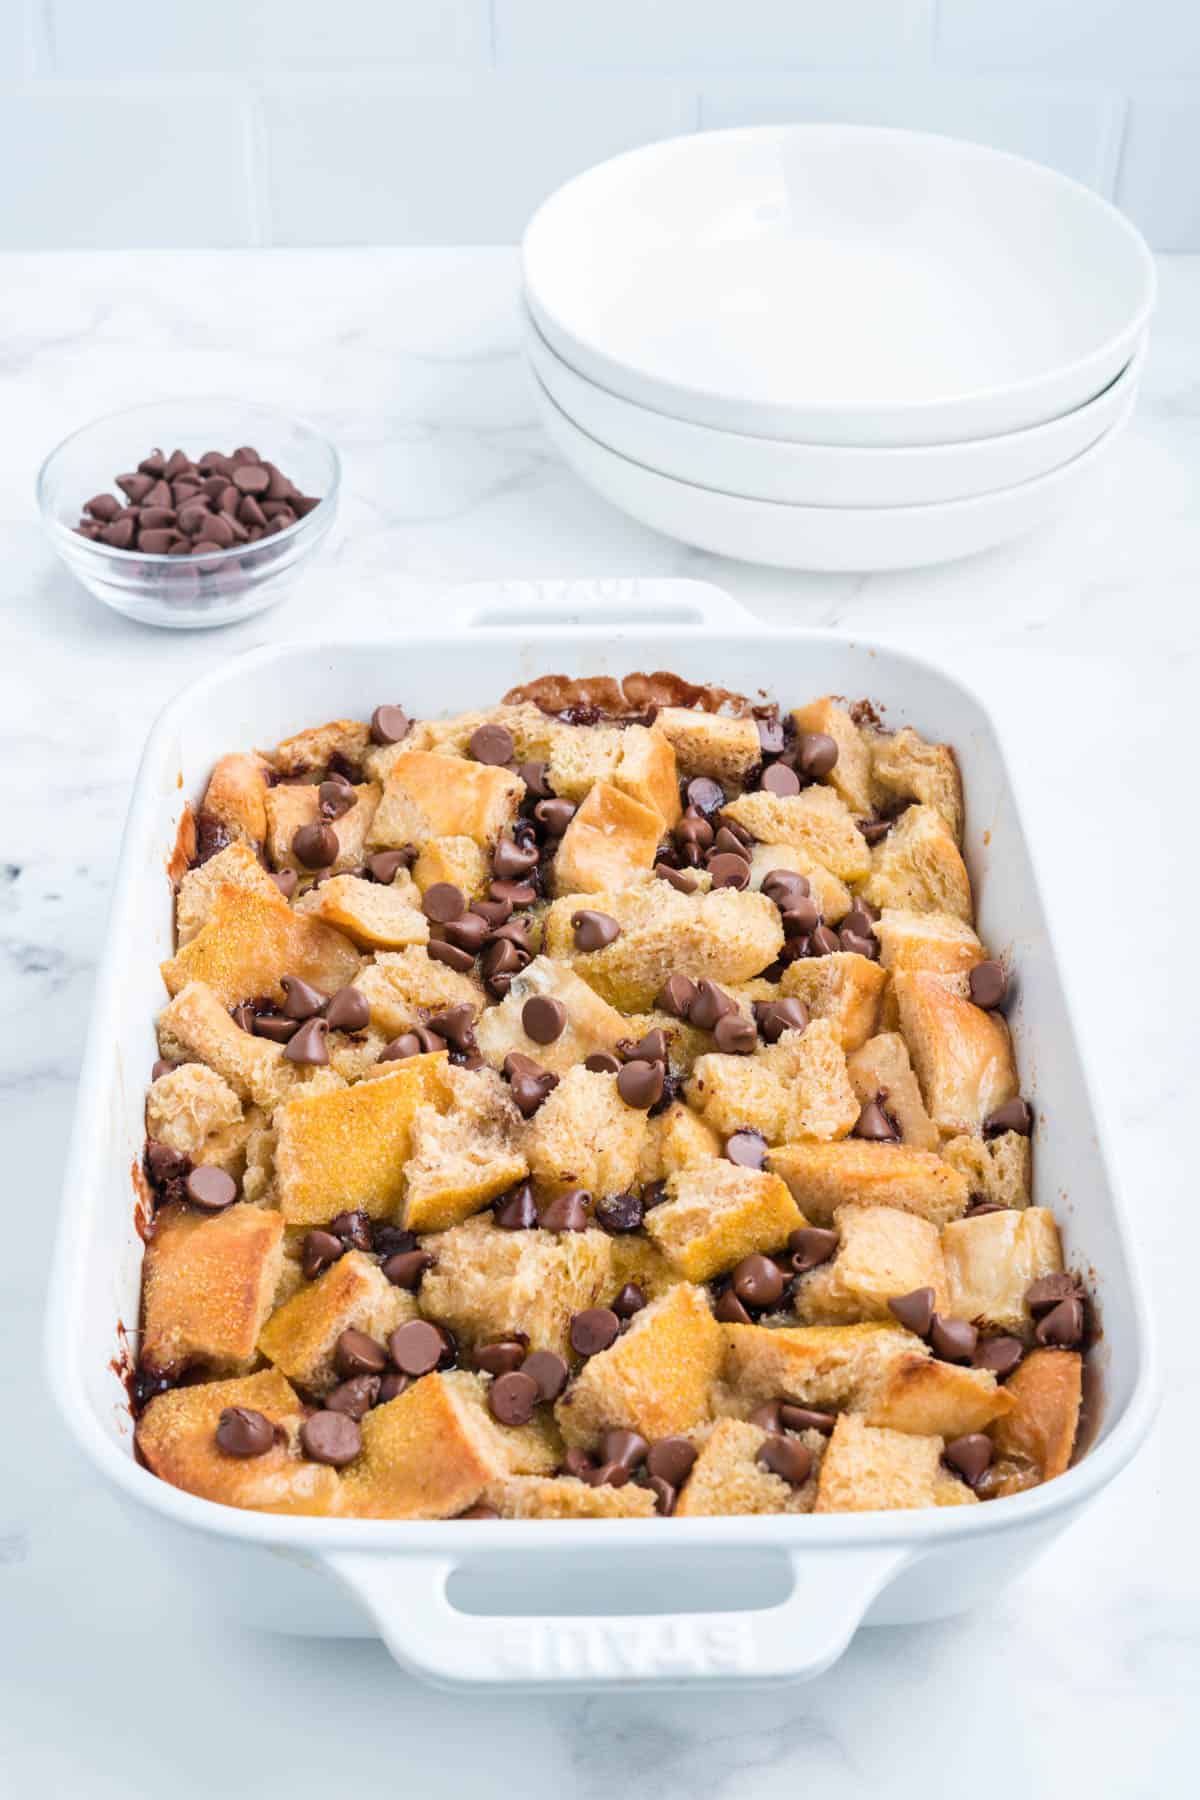 Choc chip bread pudding in a white baking dish.